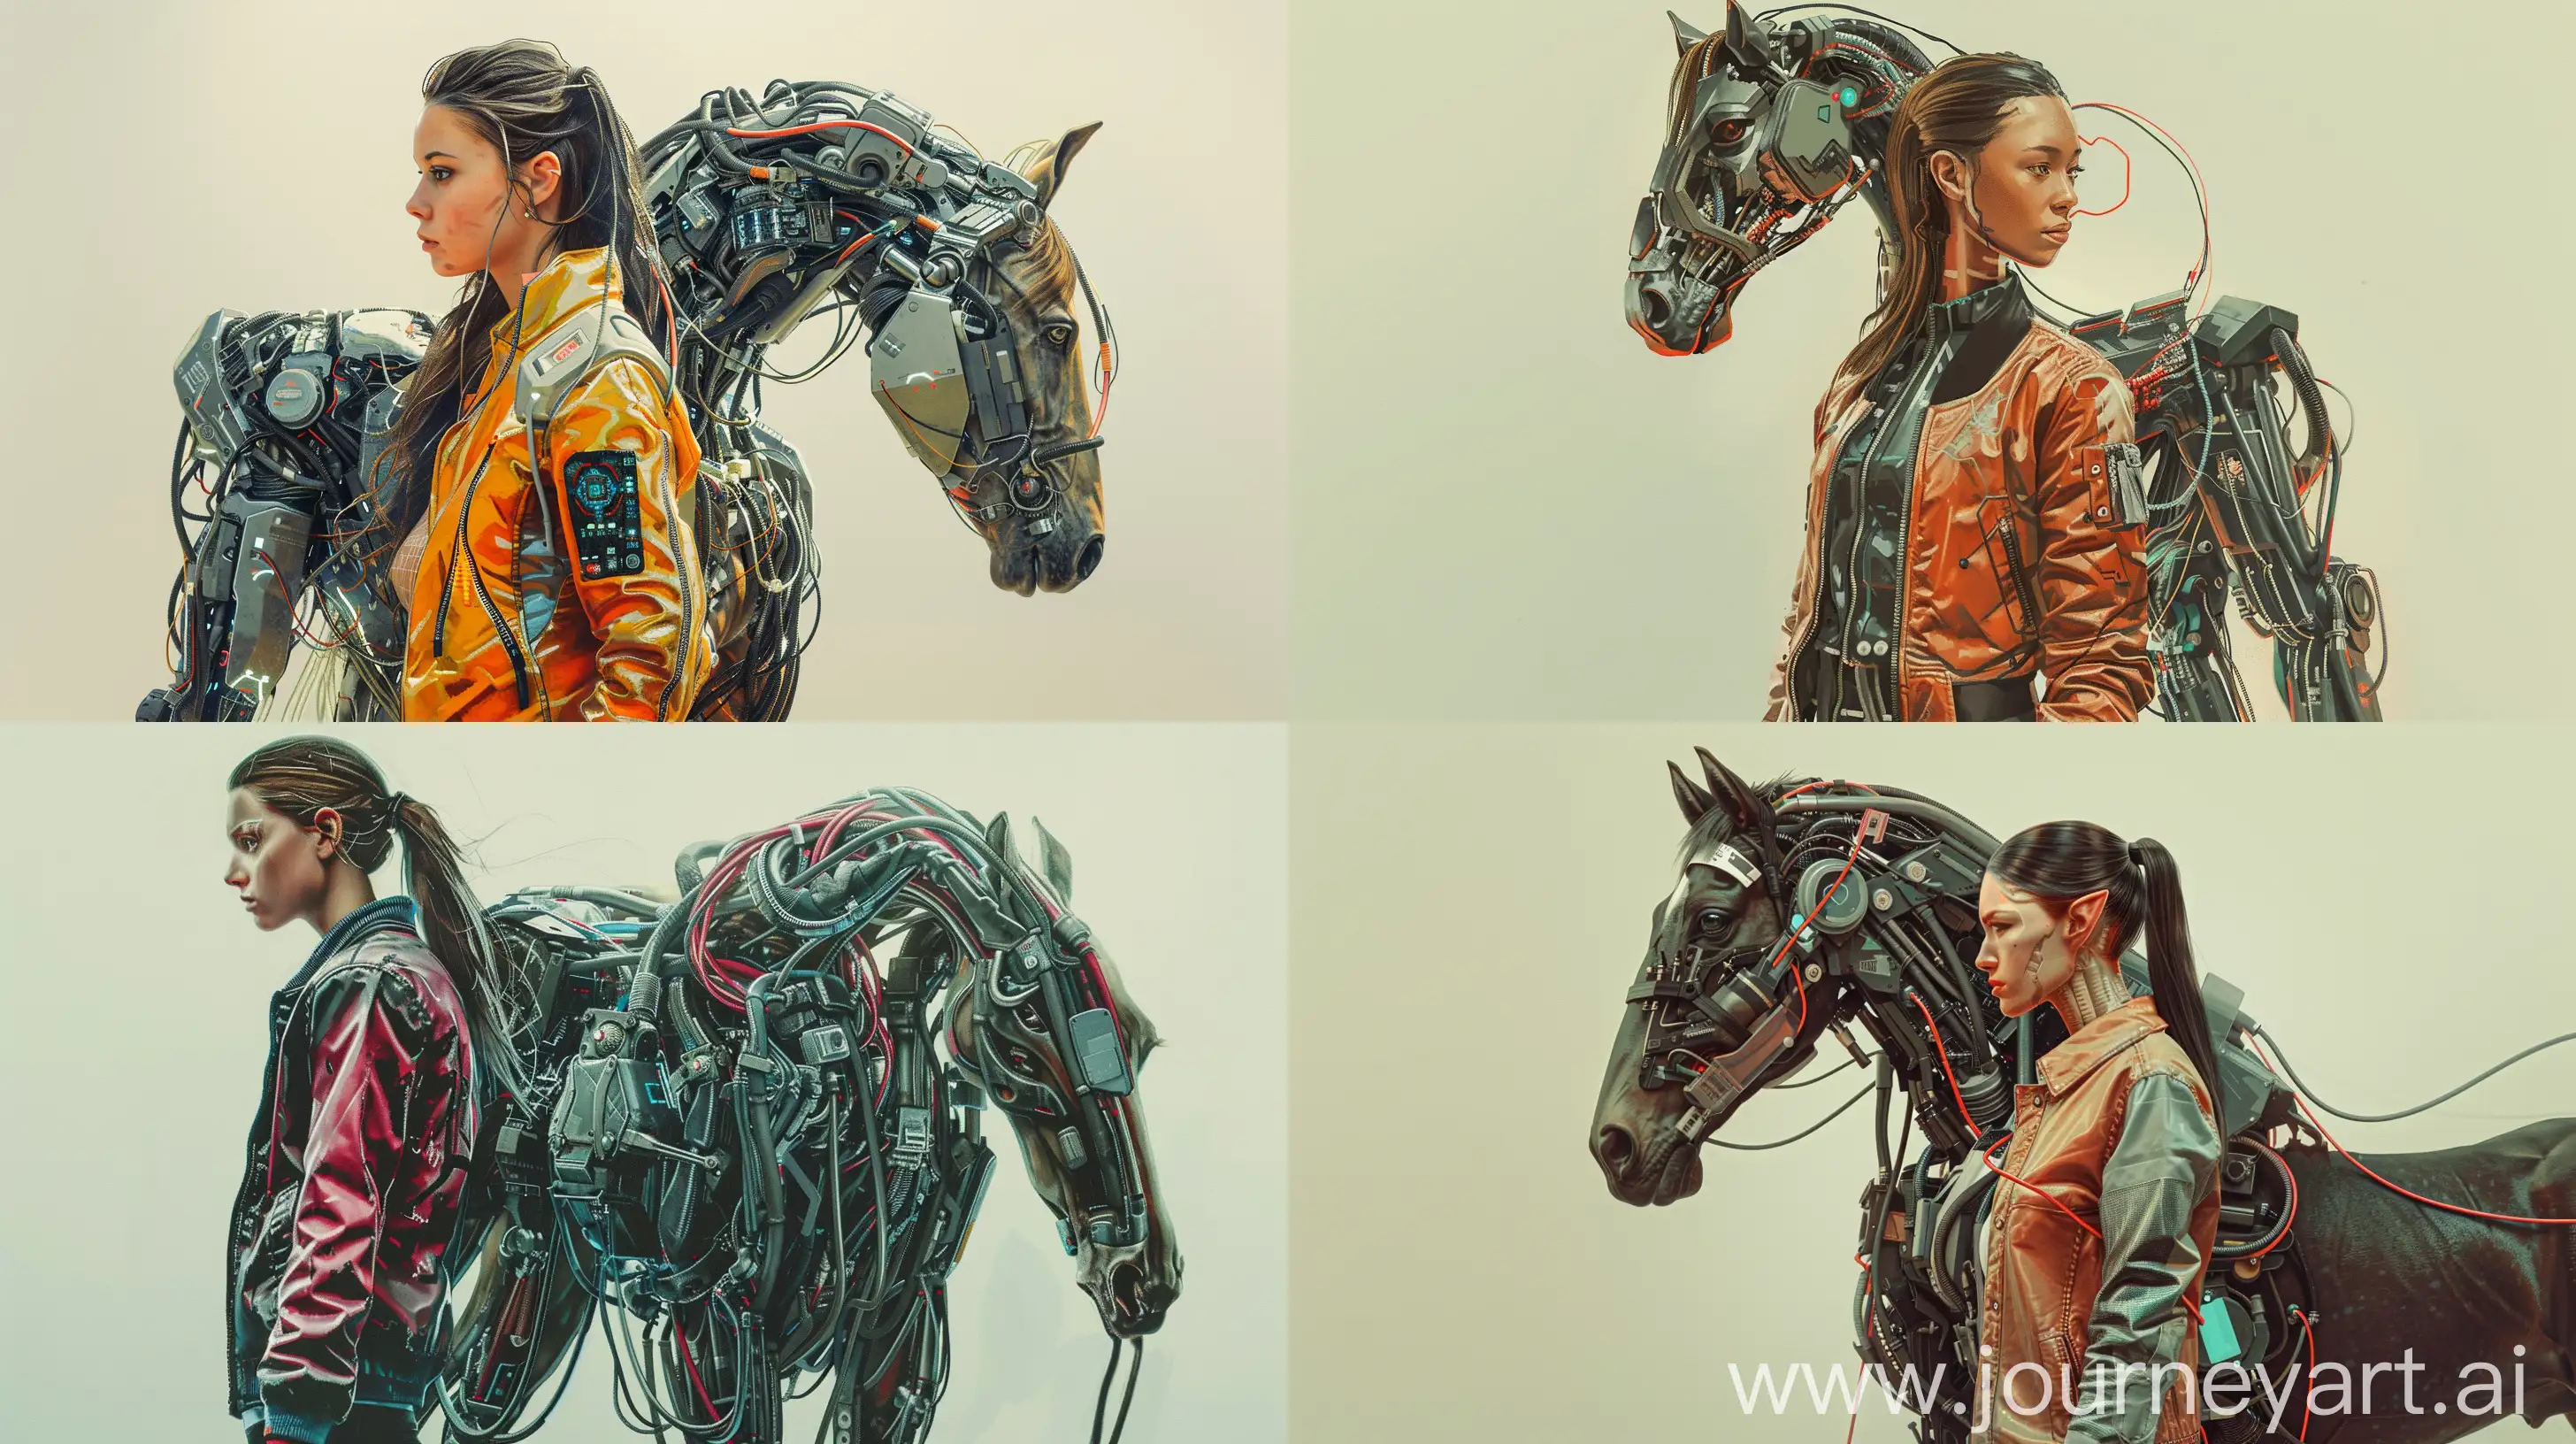 Create a hyper-realistic digital painting of a female centaur. The torso, head, and arms of the figure will be that of a woman, and the horse body will be futuristic and robotic. The composition of the woman and the horse has to be a single figure, like a centaur. The horse part should convey technology, wires, and a cyberpunk style. The woman is beautiful and dressed in a modern American jacket, like that of an executive. Include bright colors and detailed textures. The background should be very neutral and not distract attention from the rest of the scene. --ar 16:9 --v 6